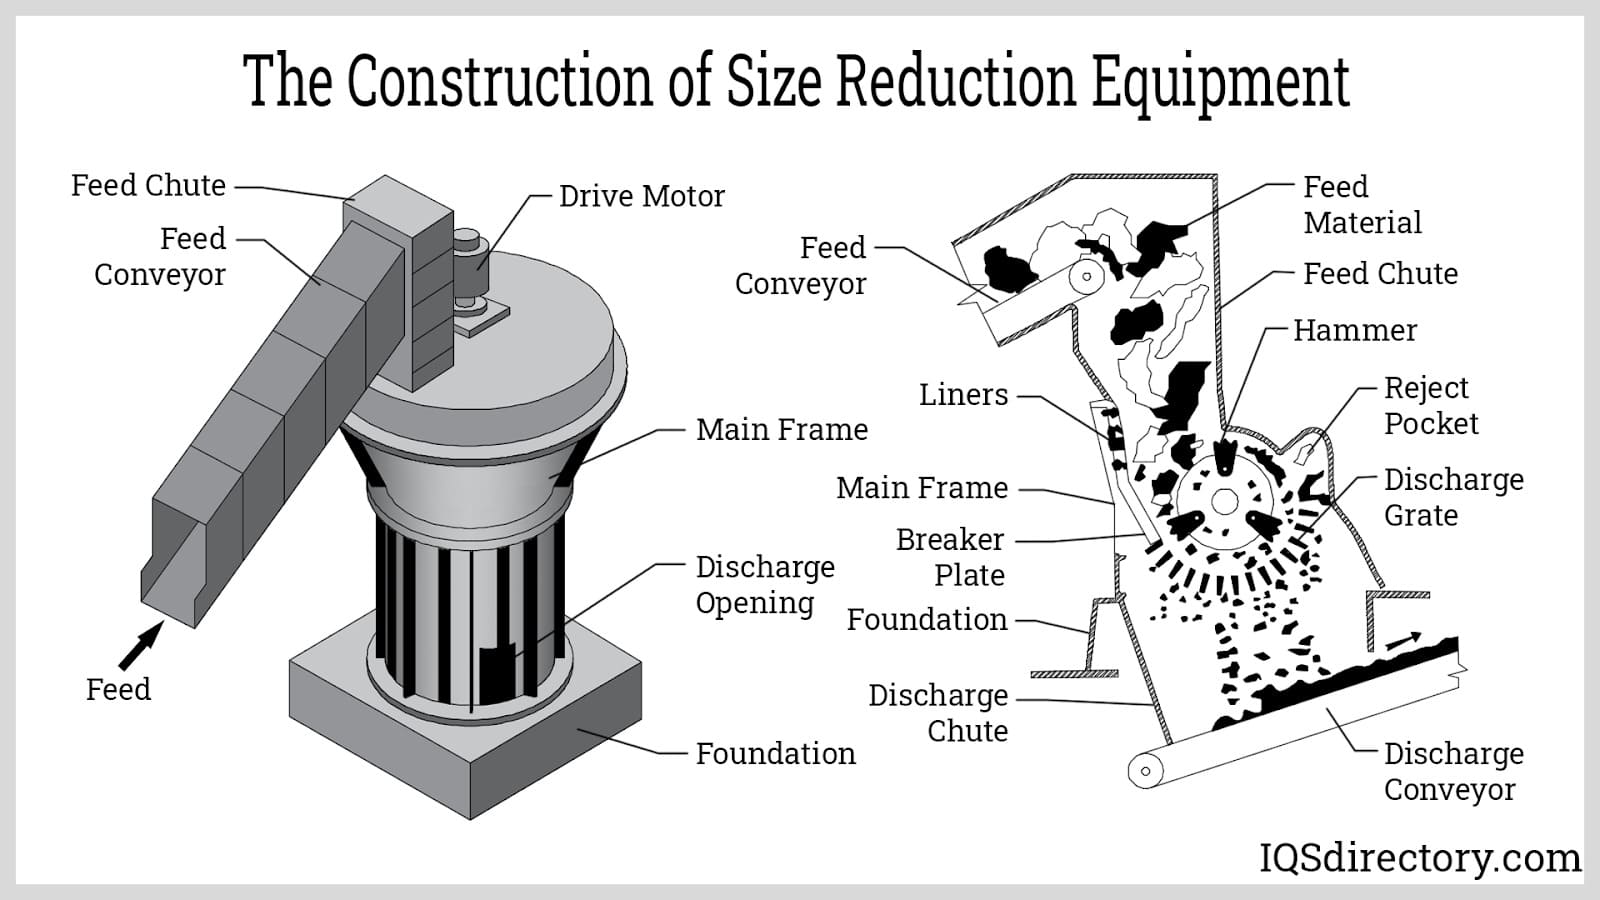 Construction of Size Reduction Equipment